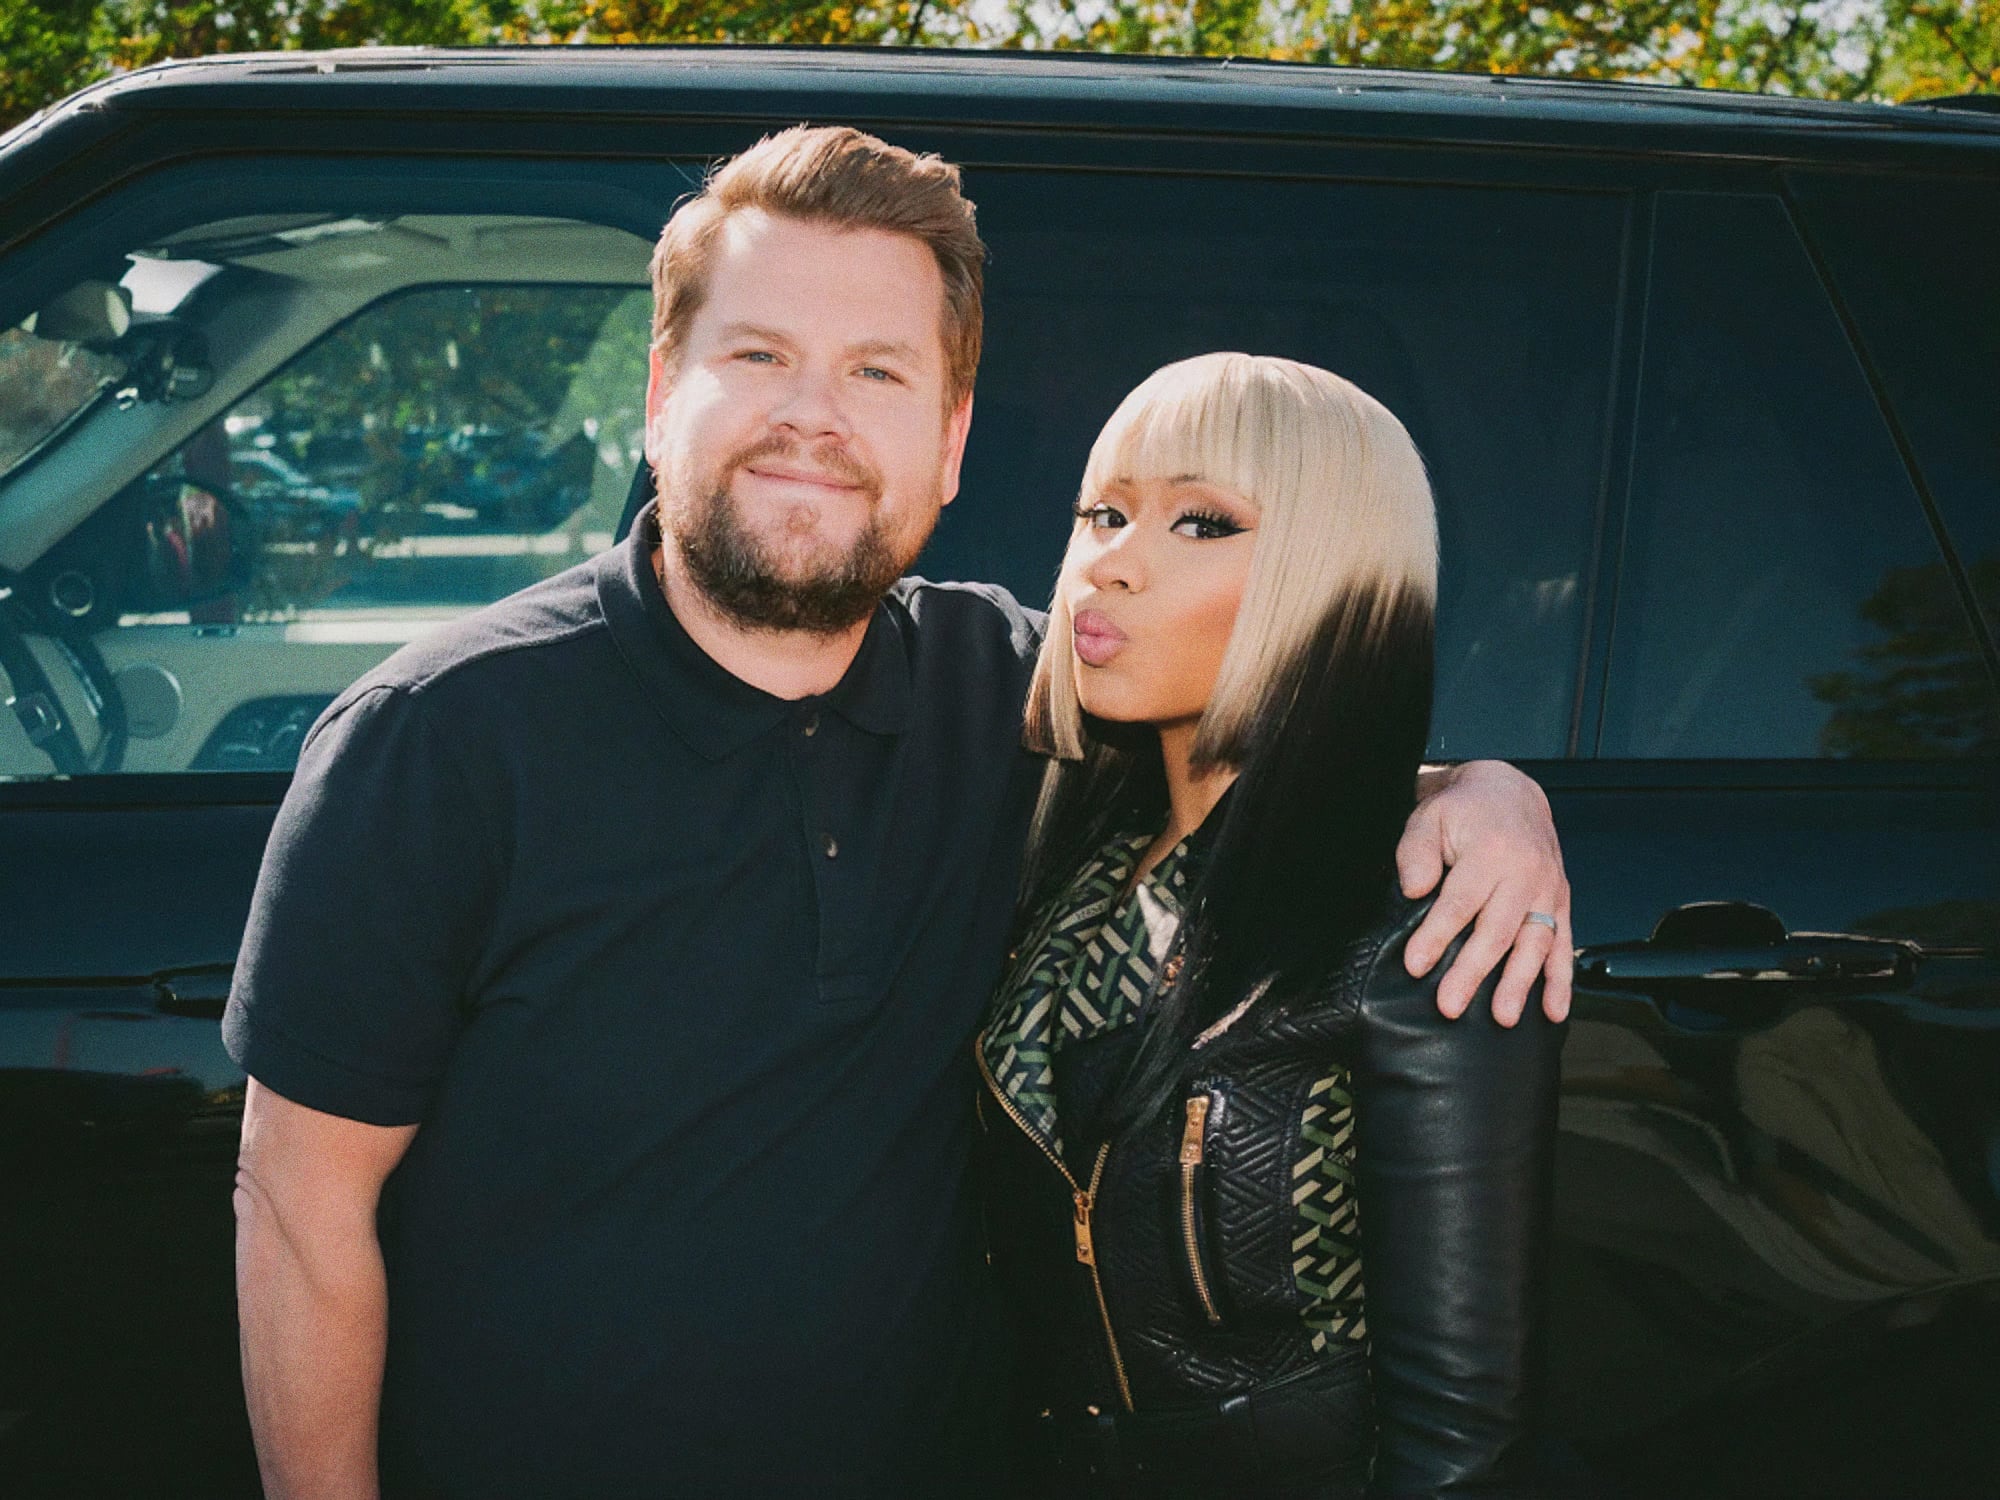 LOS ANGELES - MARCH 31: Carpool Karaoke with Nicki Minaj on The Late Late Show with James Corden. (Photo by Terence Patrick/CBS via Getty Images)